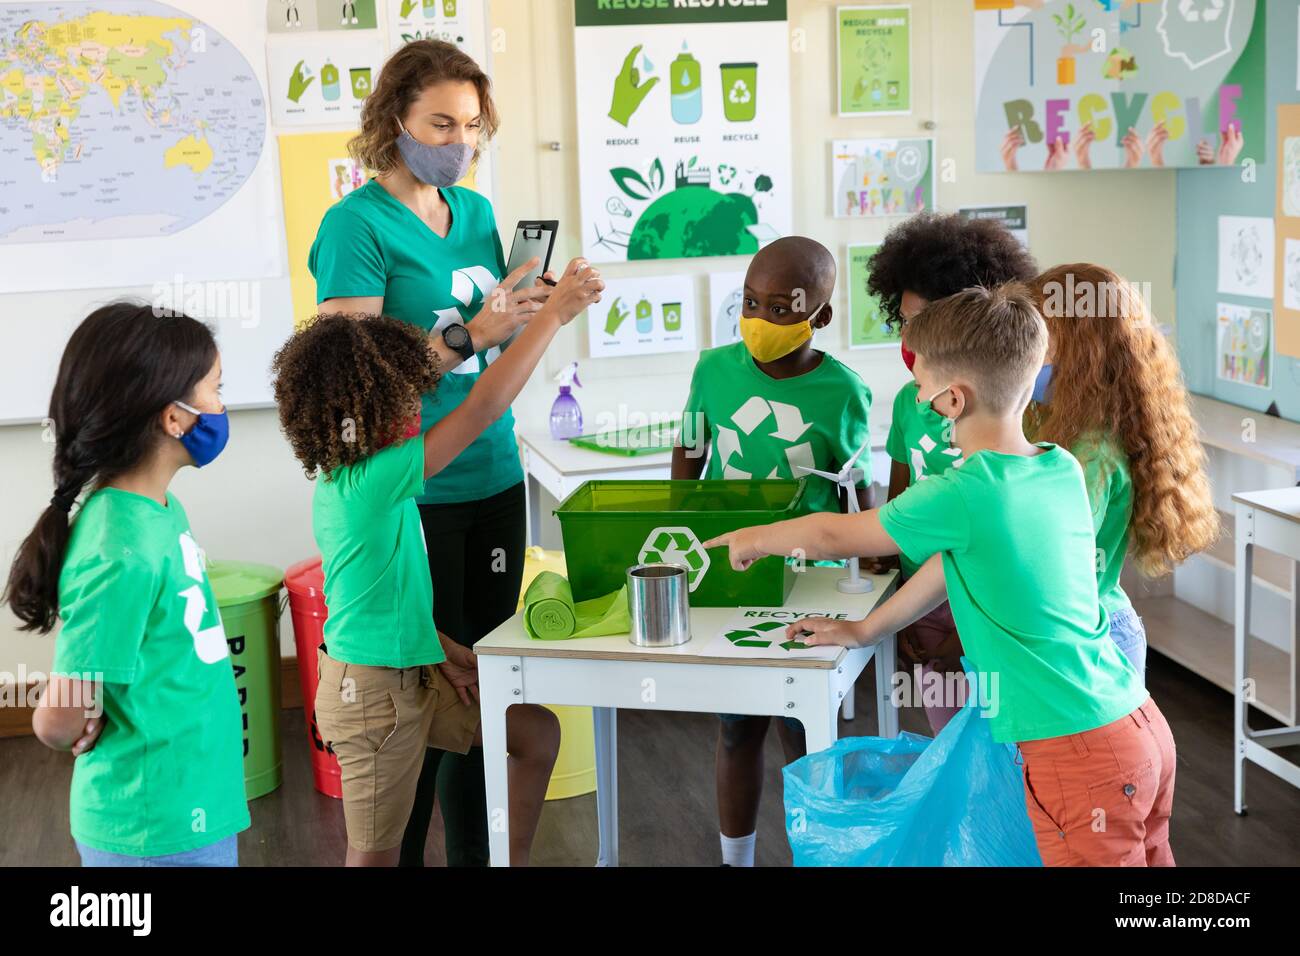 Female teacher and students wearing face masks with recycling container on table in class Stock Photo